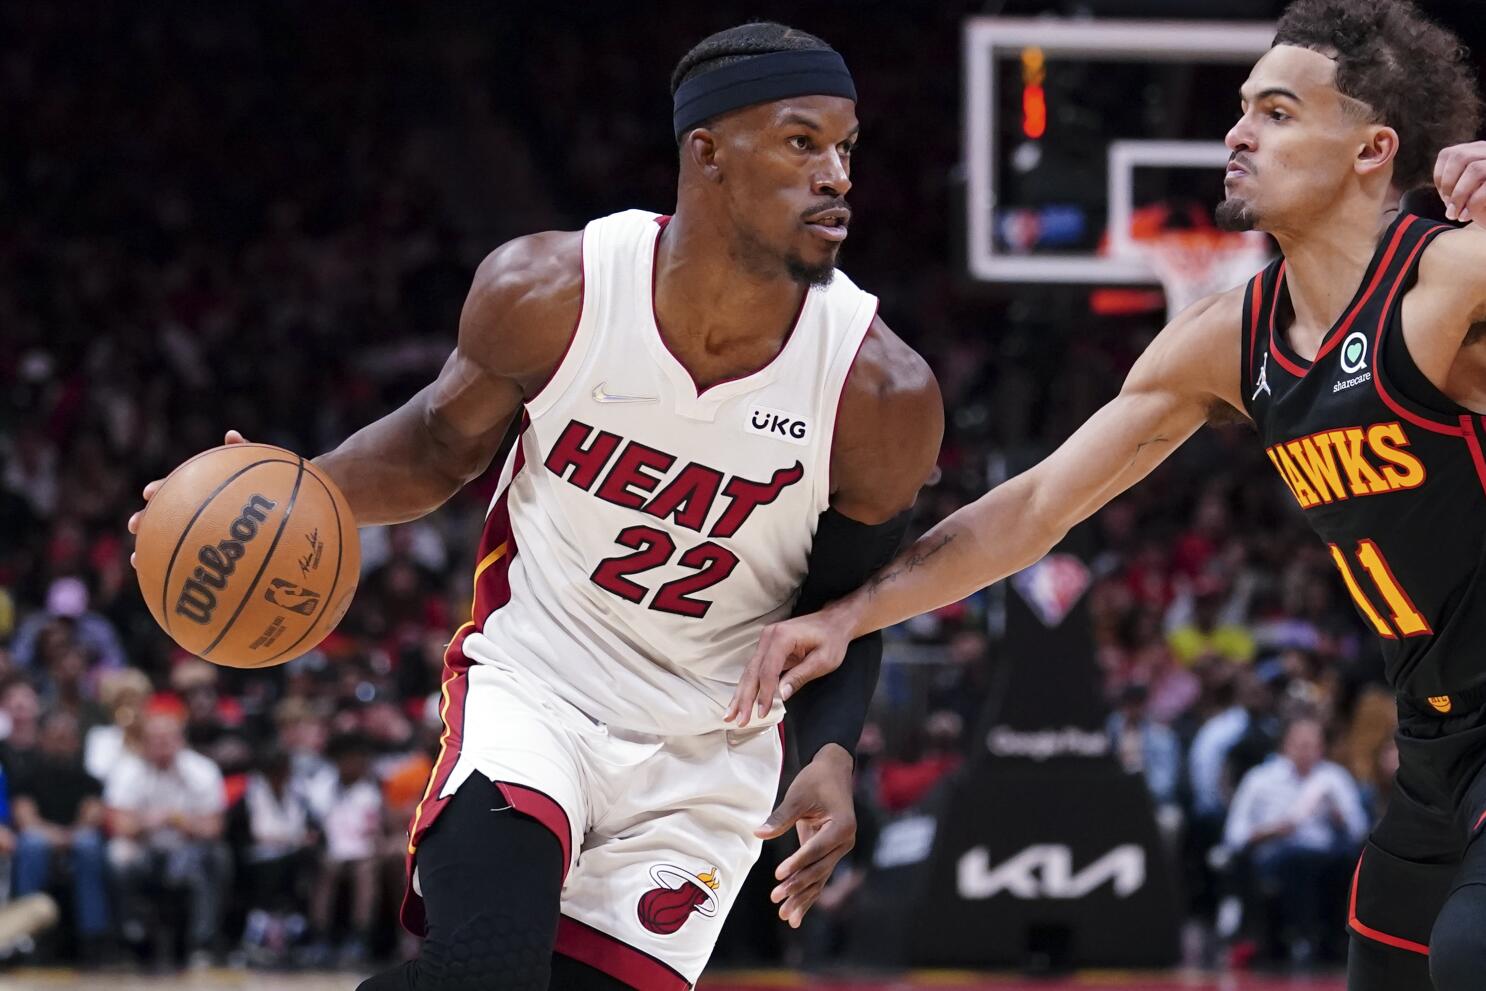 Butler has 36 points as Heat overwhelm Young, Hawks, 110-86